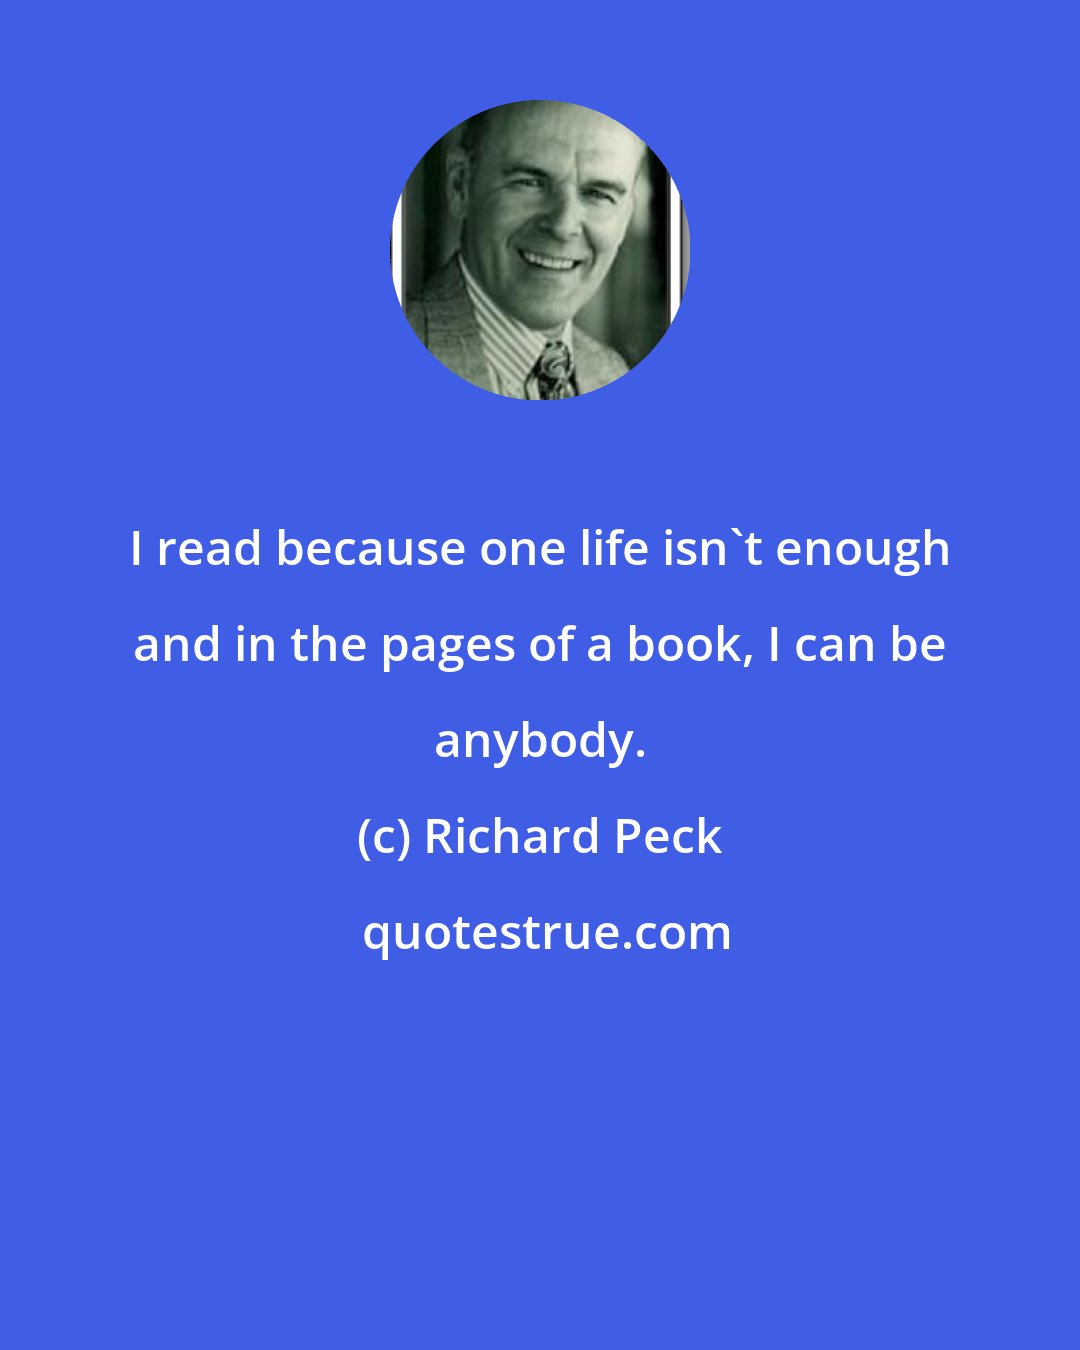 Richard Peck: I read because one life isn't enough and in the pages of a book, I can be anybody.